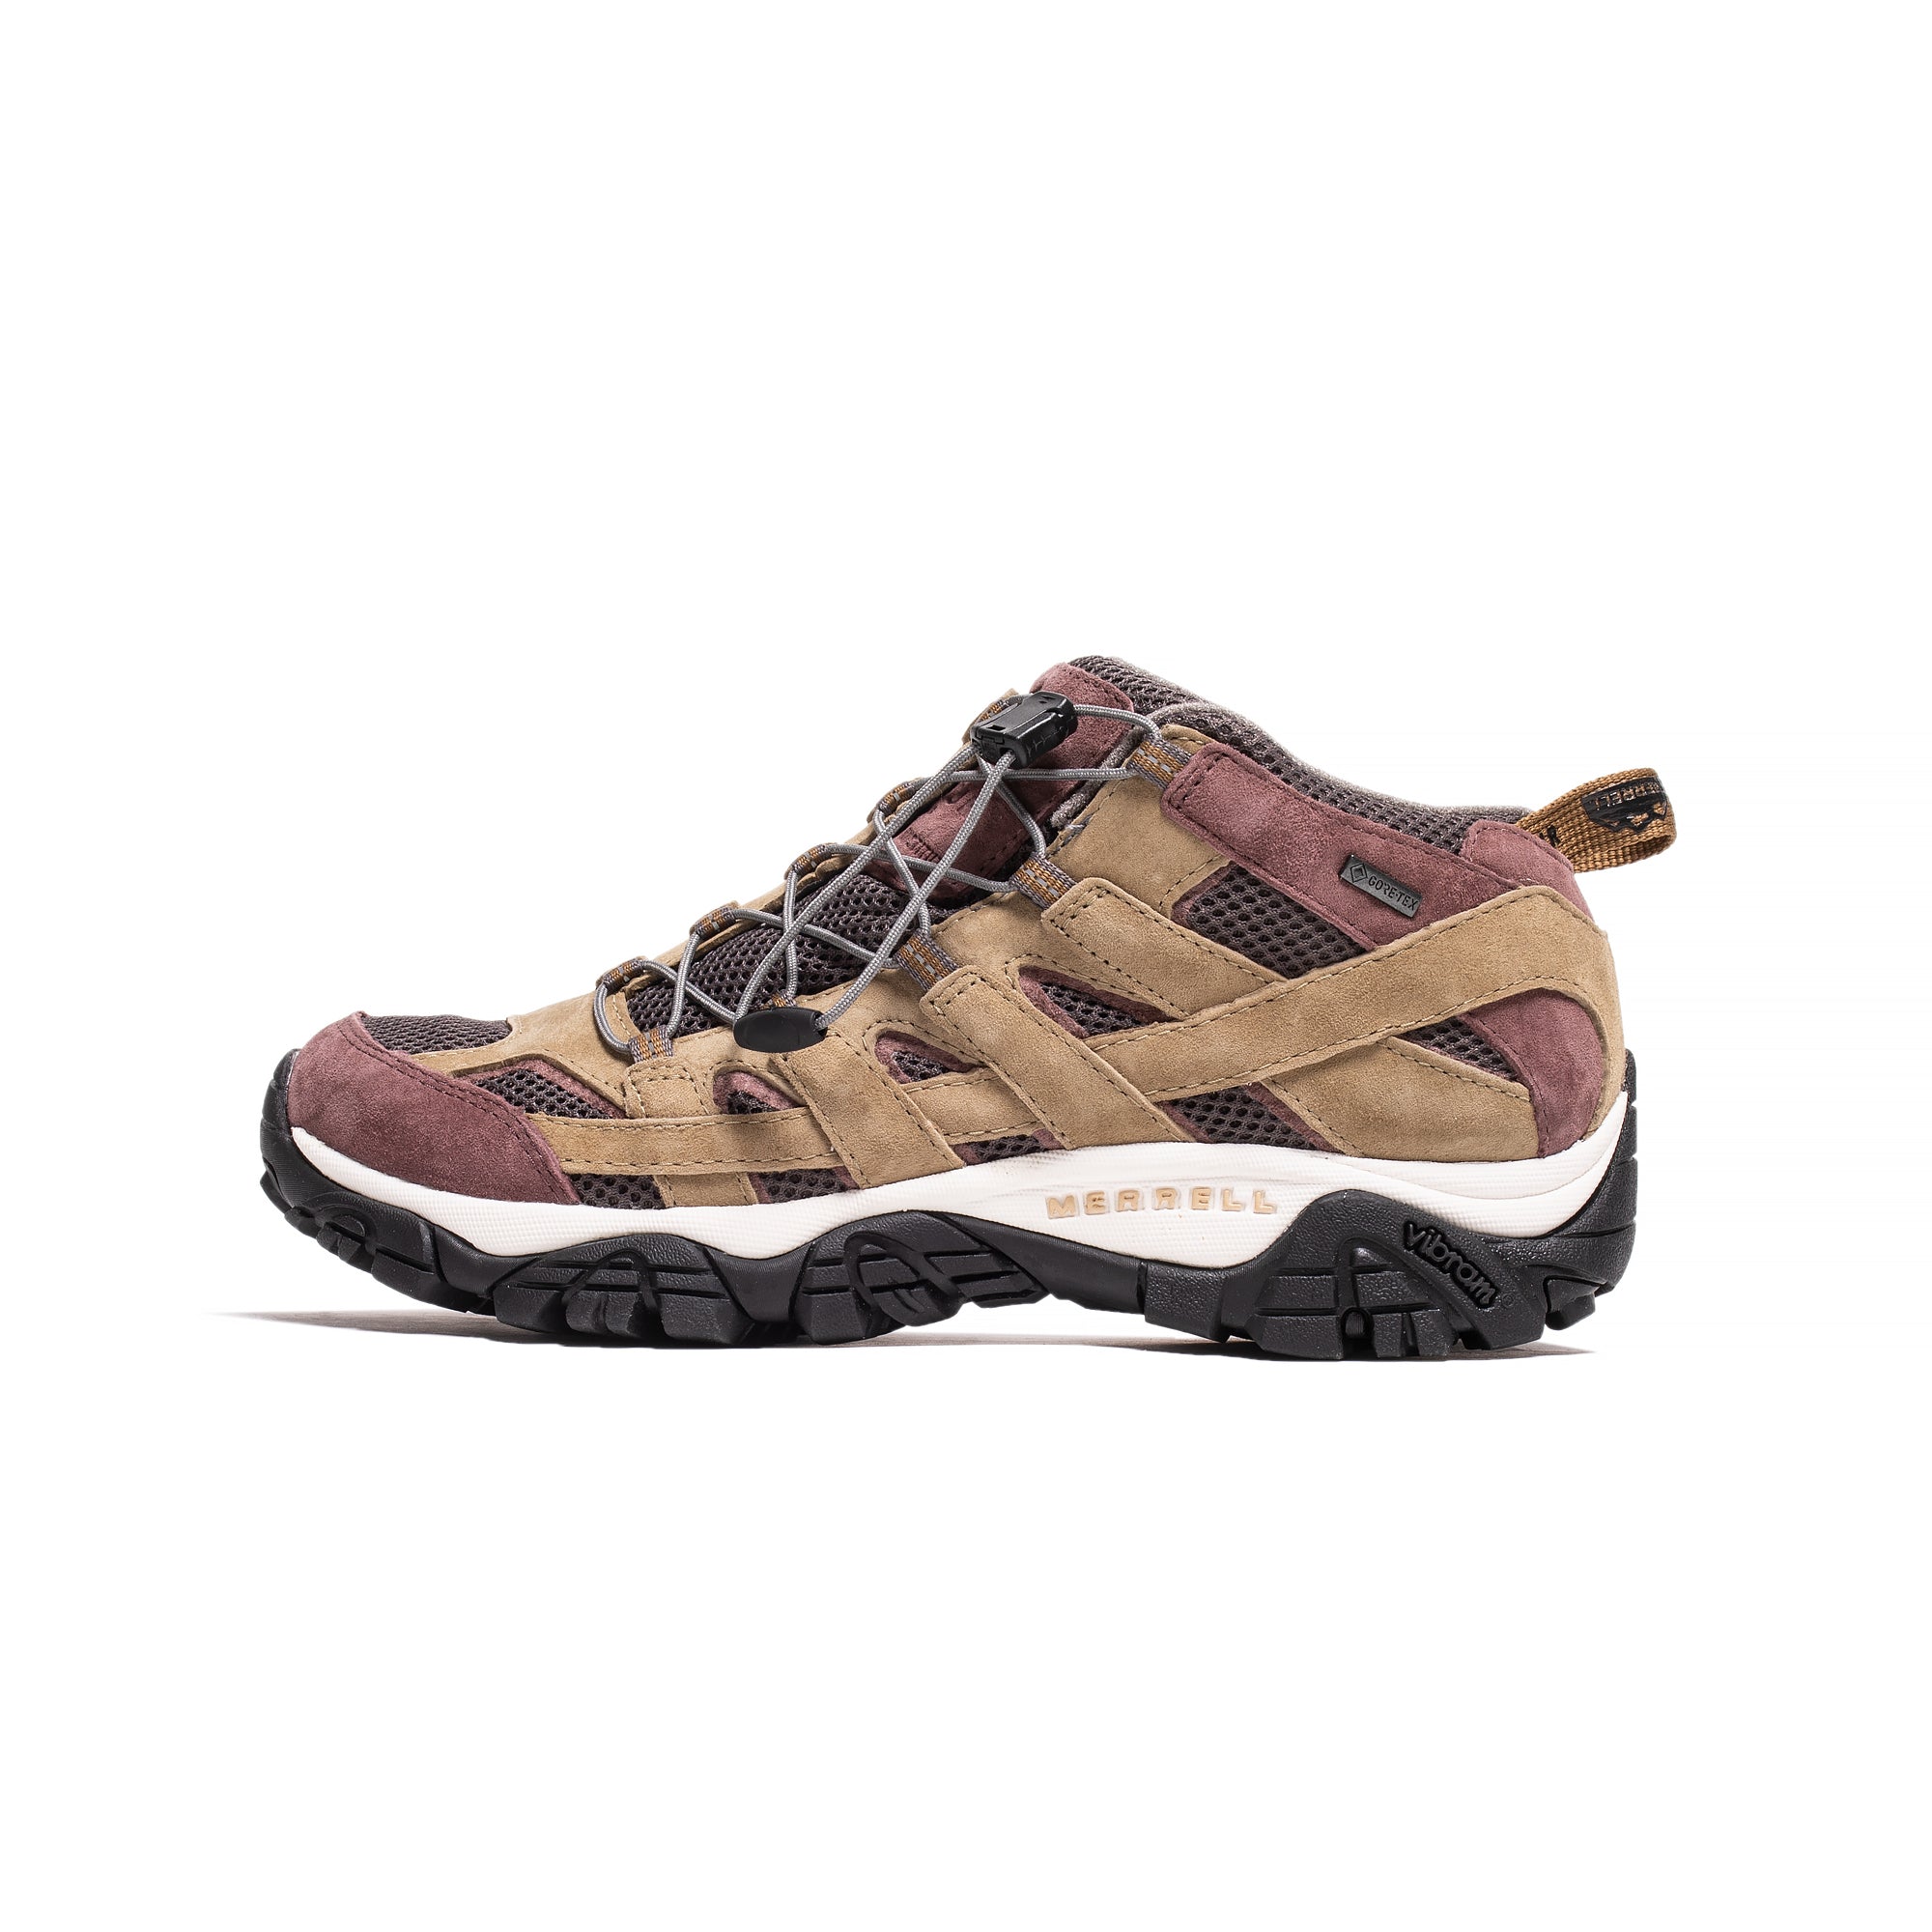 Merrell x A.Four 1TRL Shoes 'Coyote' – Extra Butter